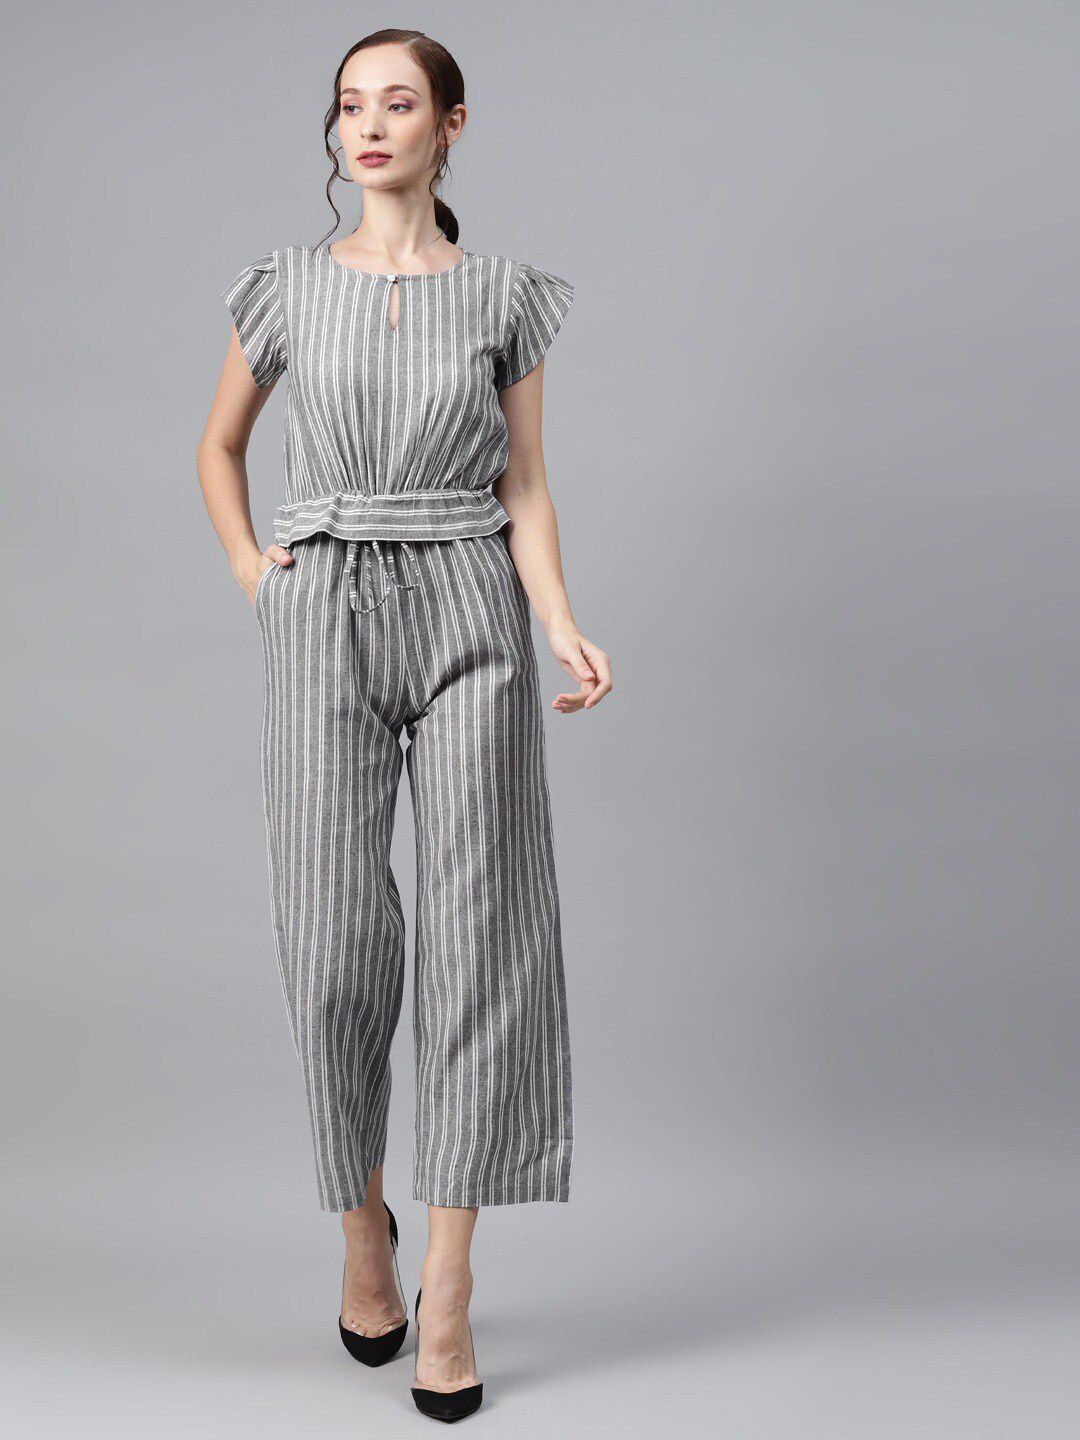 Cottinfab Grey & White Striped Culotte Jumpsuit Price in India